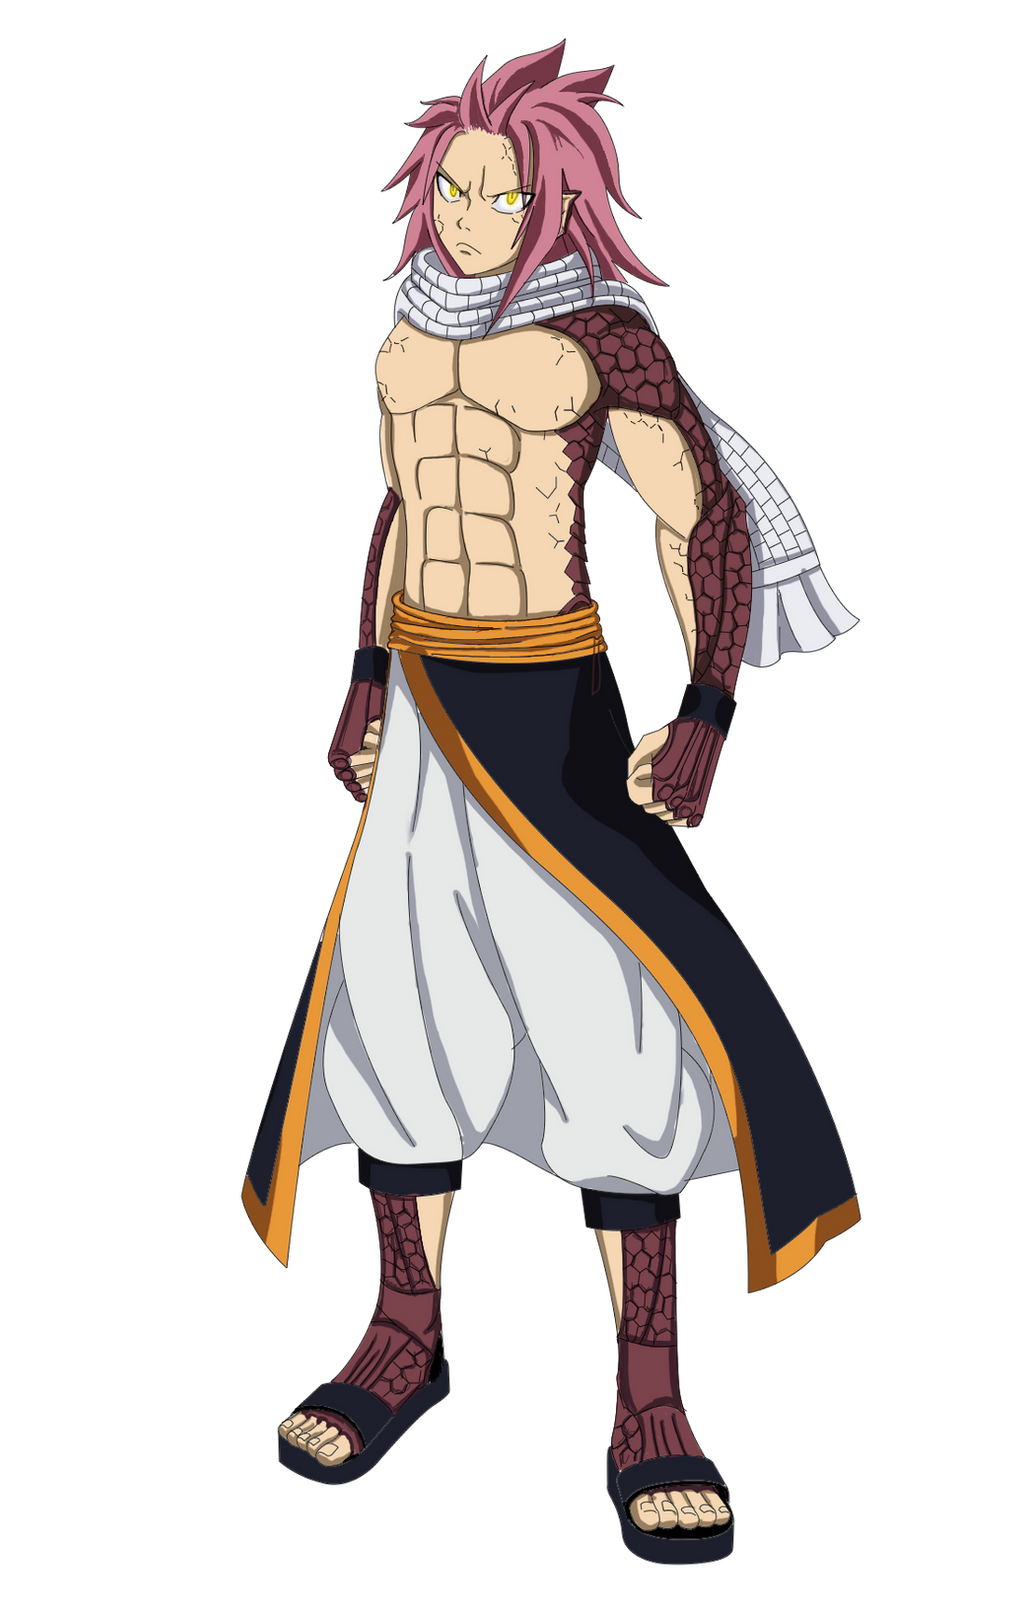 Fairy Tail Episode 175: Natsu vs. The Two Dragons